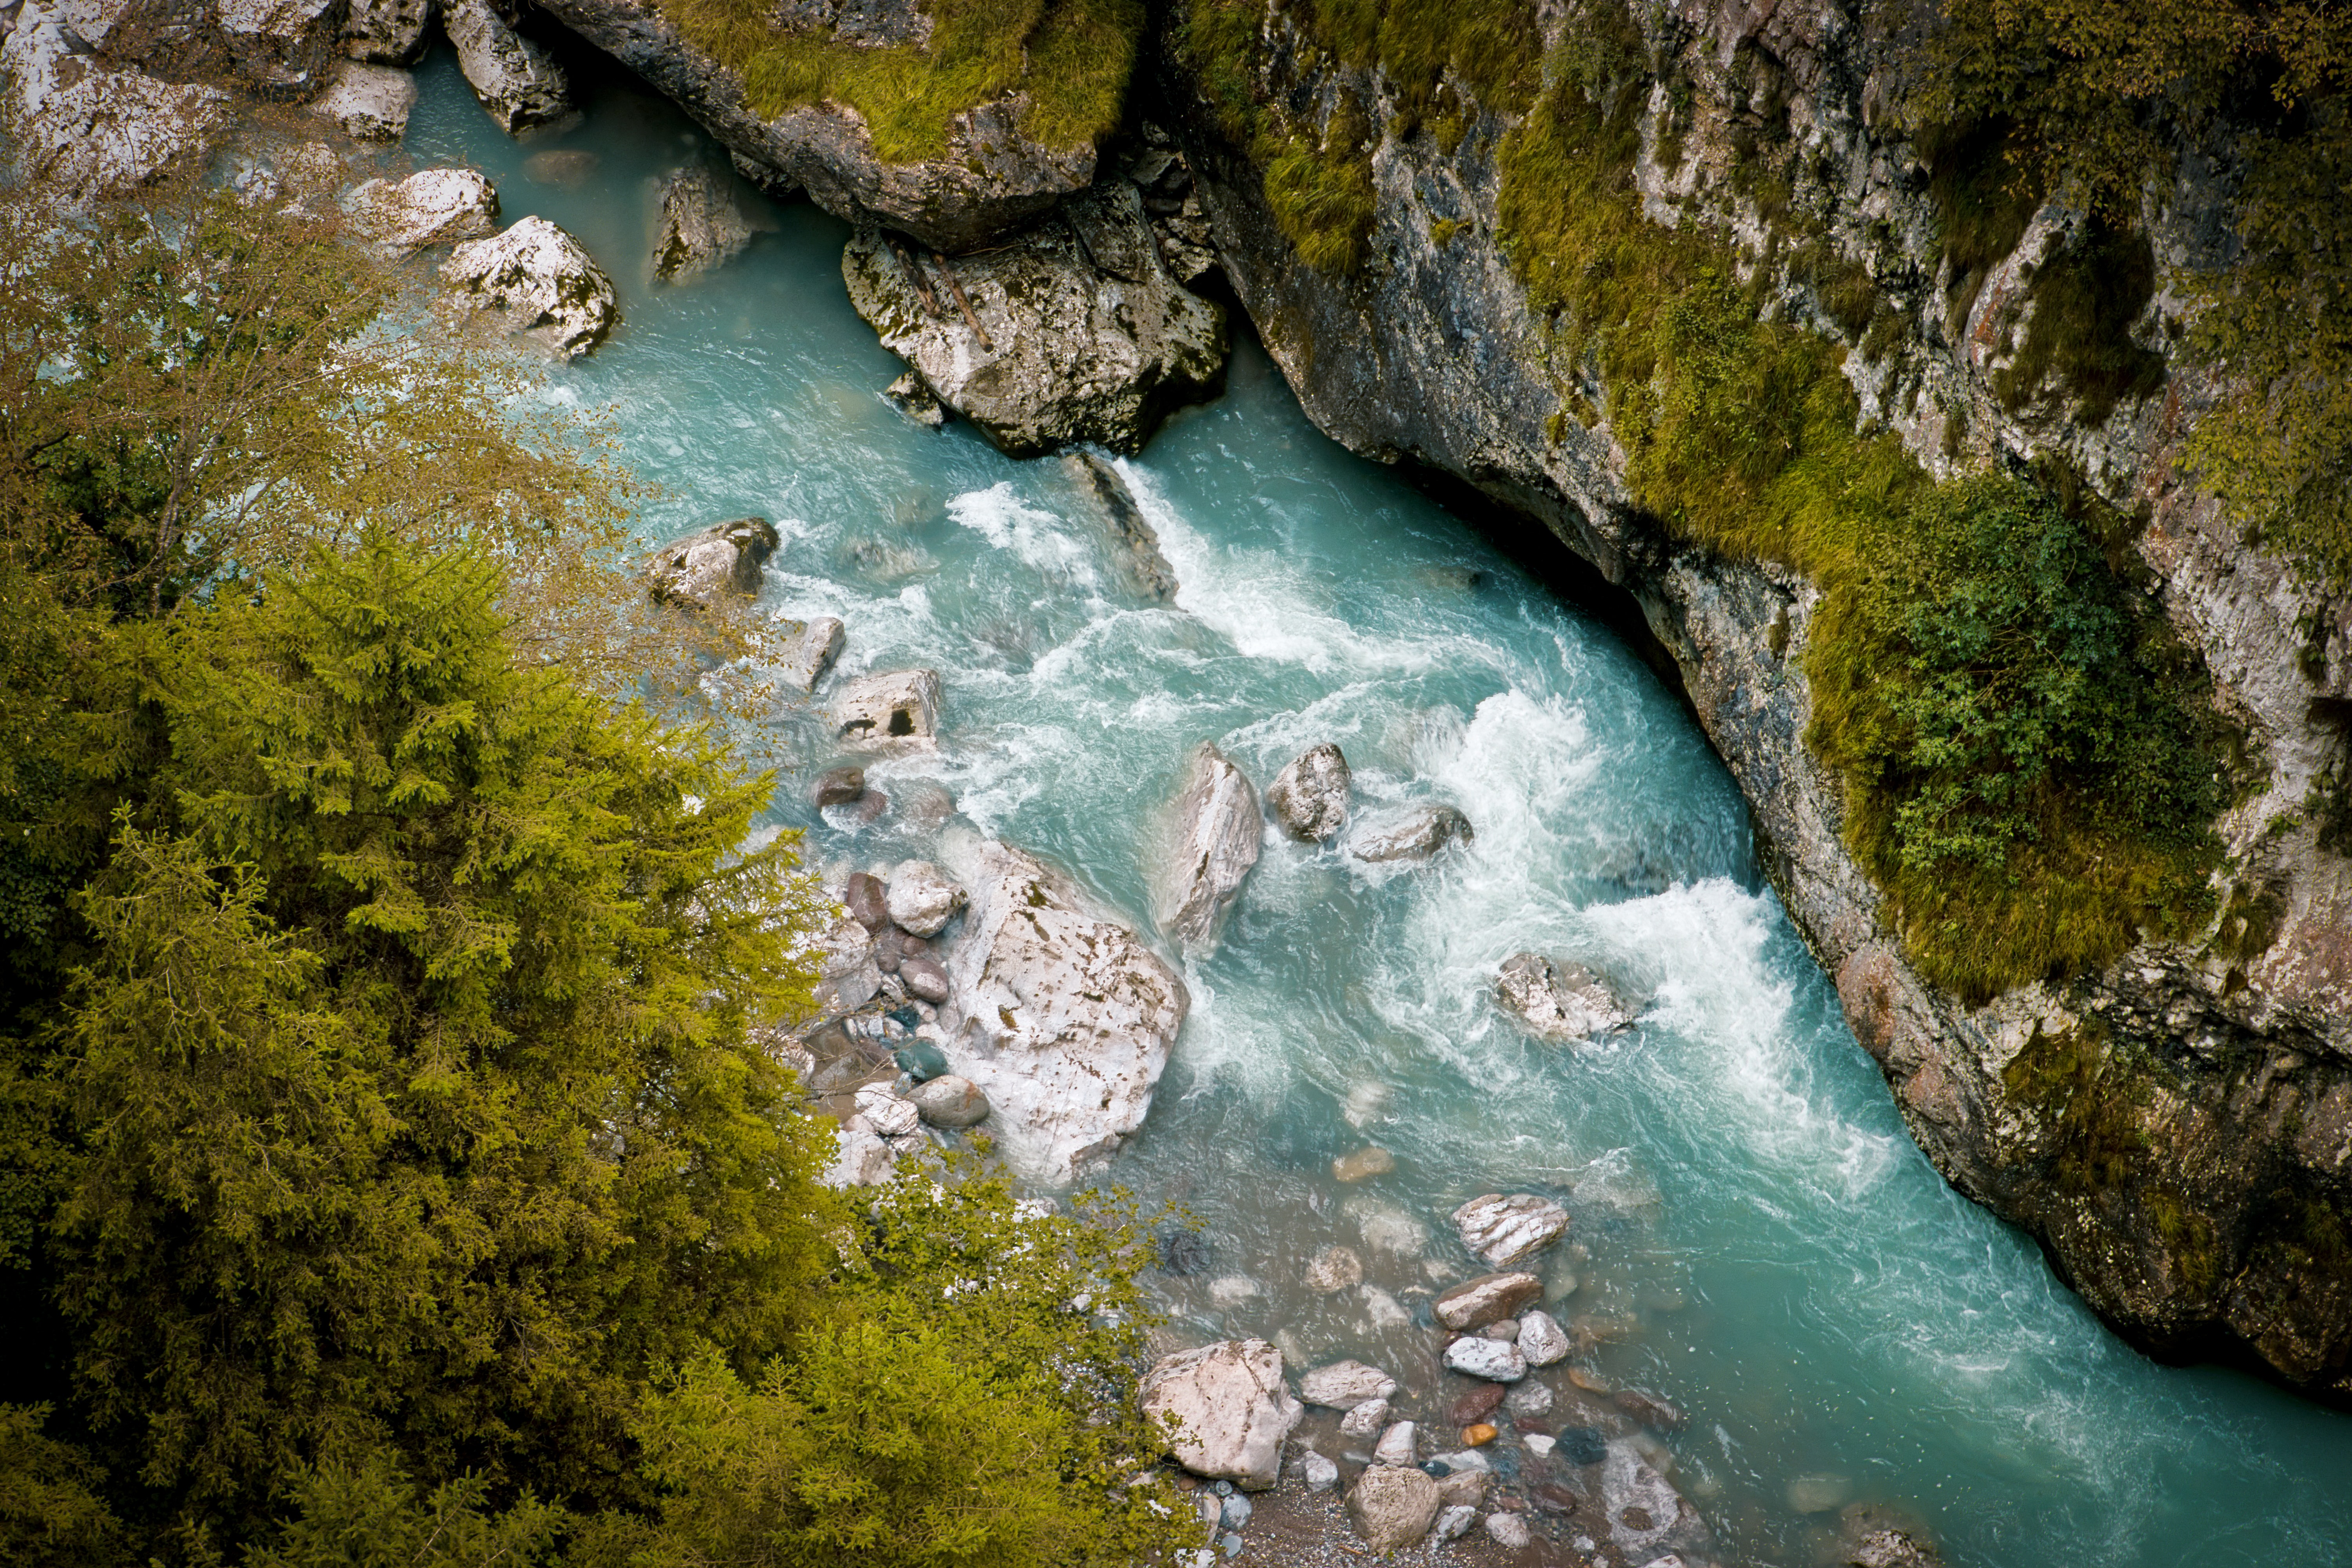 view from above, nature, rivers, trees, rocks images